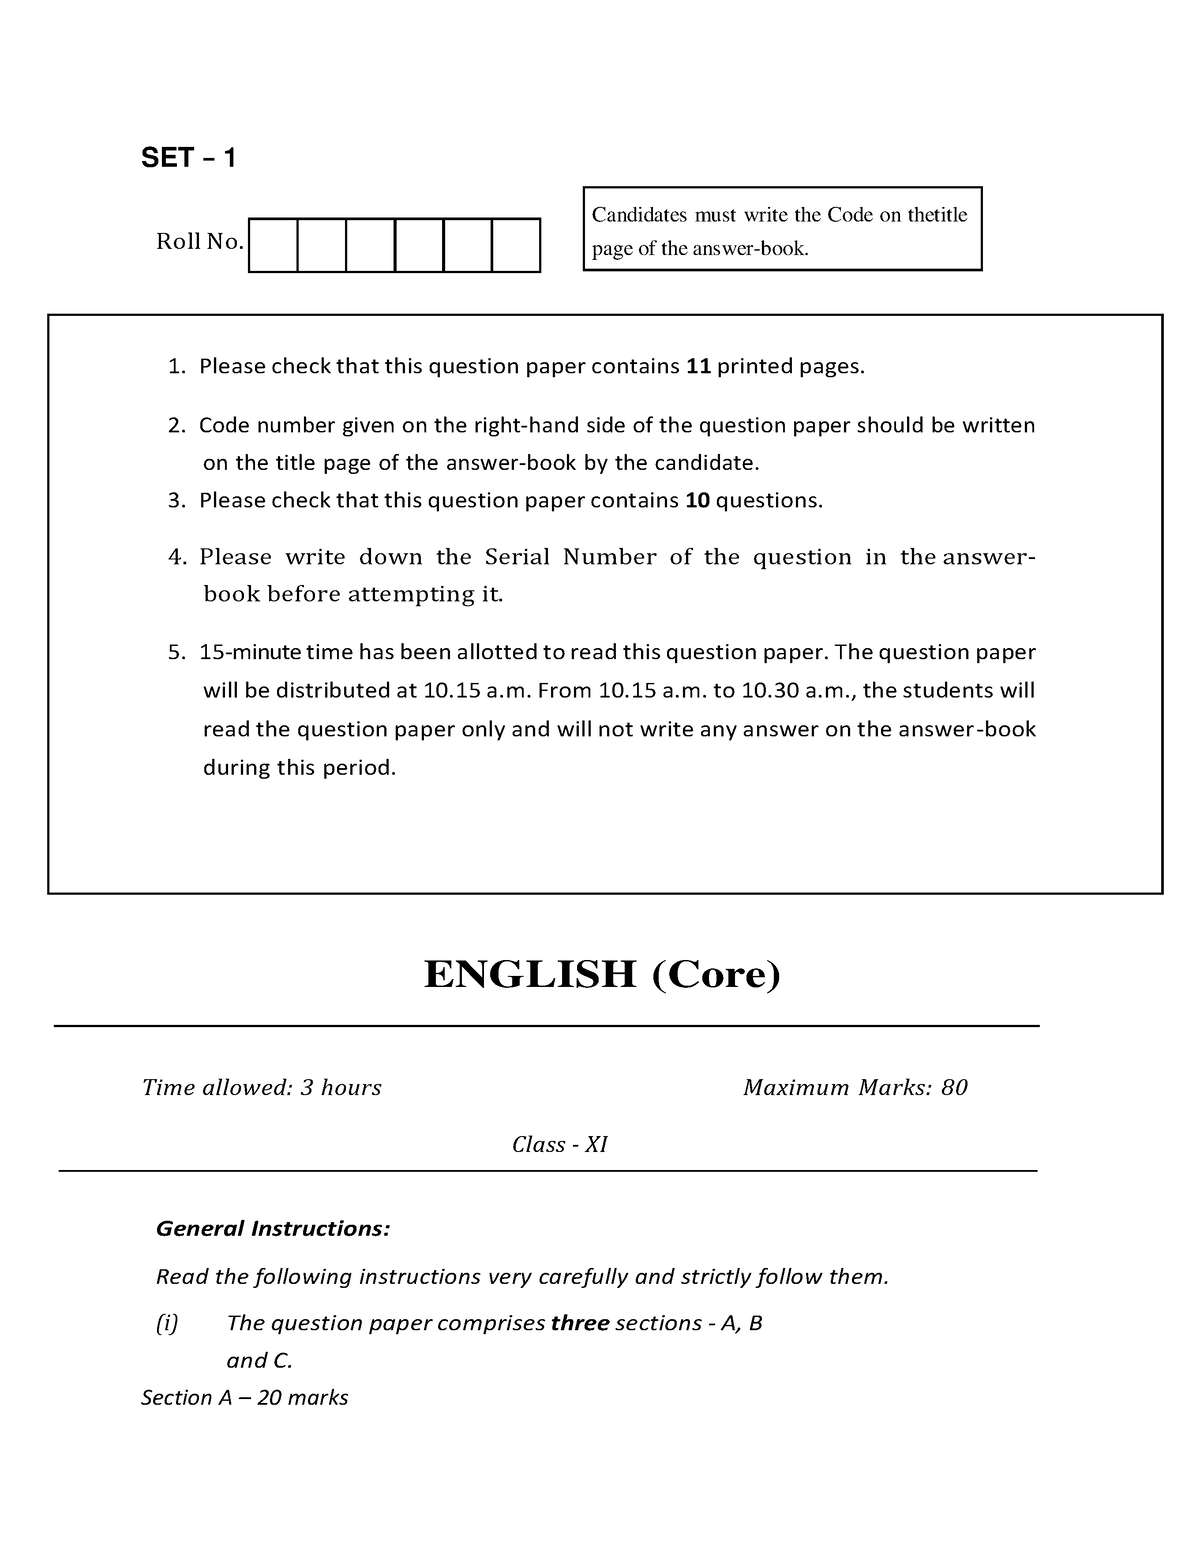 English - this is a sample question paper. - SET – 1 Roll No. 1. Please ...